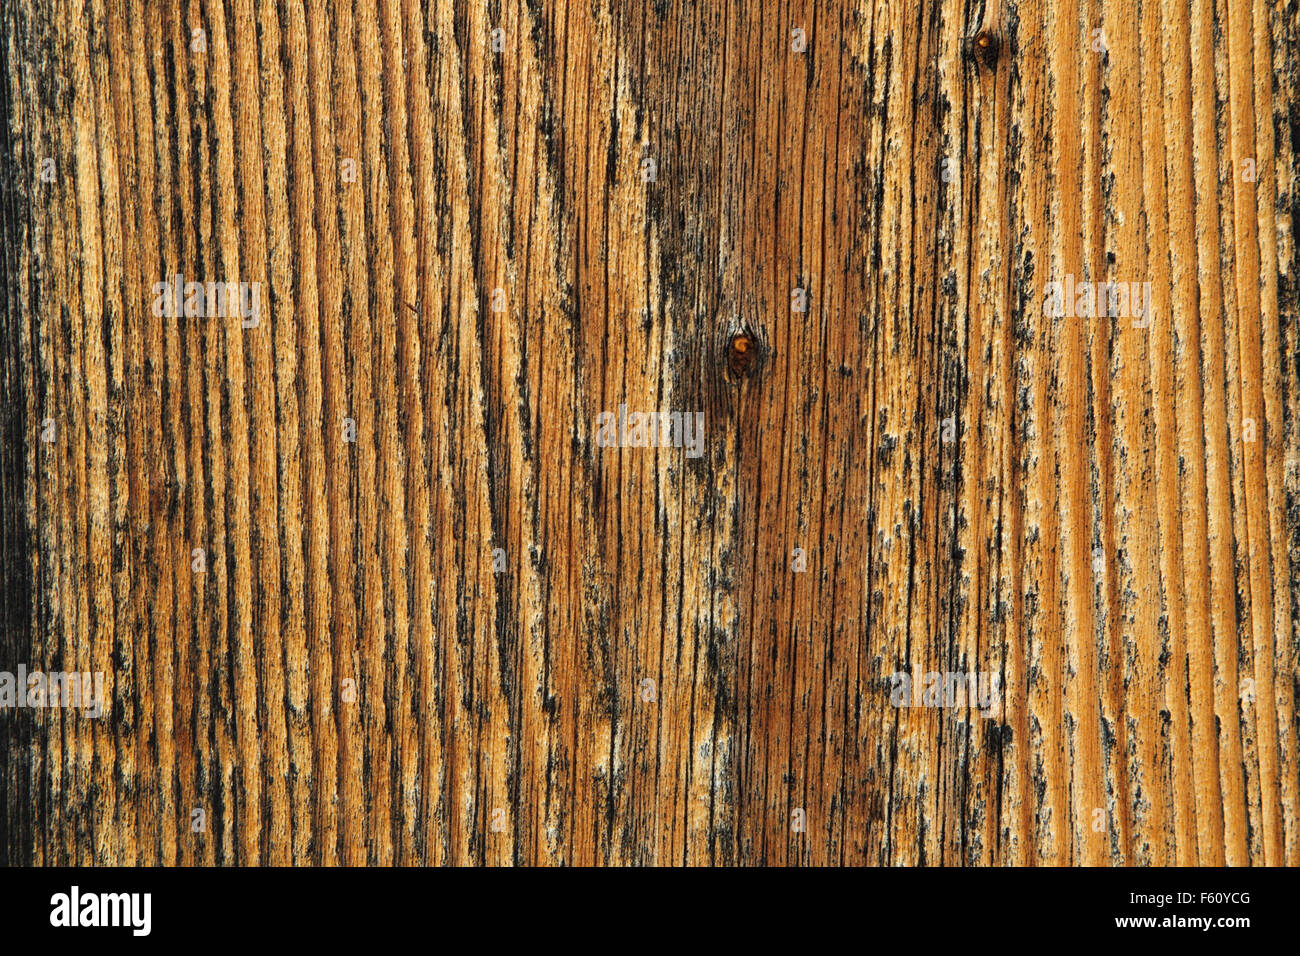 Natural background of wooden planks showing fine details of wooden grain. Stock Photo